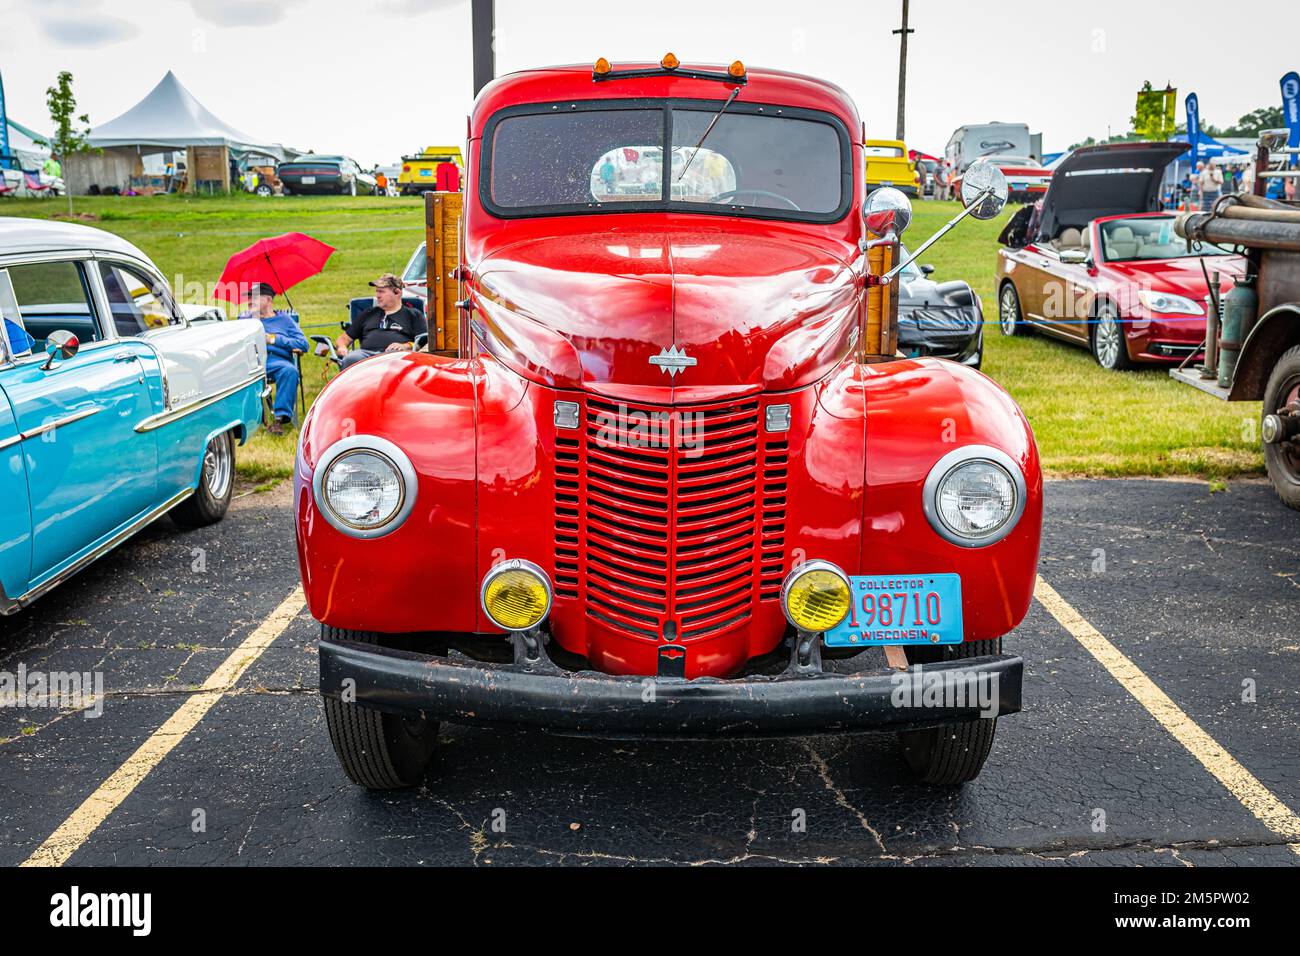 Iola, WI - July 07, 2022: High perspective front view of a 1946 International Harvester KB-1 Pickup Truck at a local car show. Stock Photo